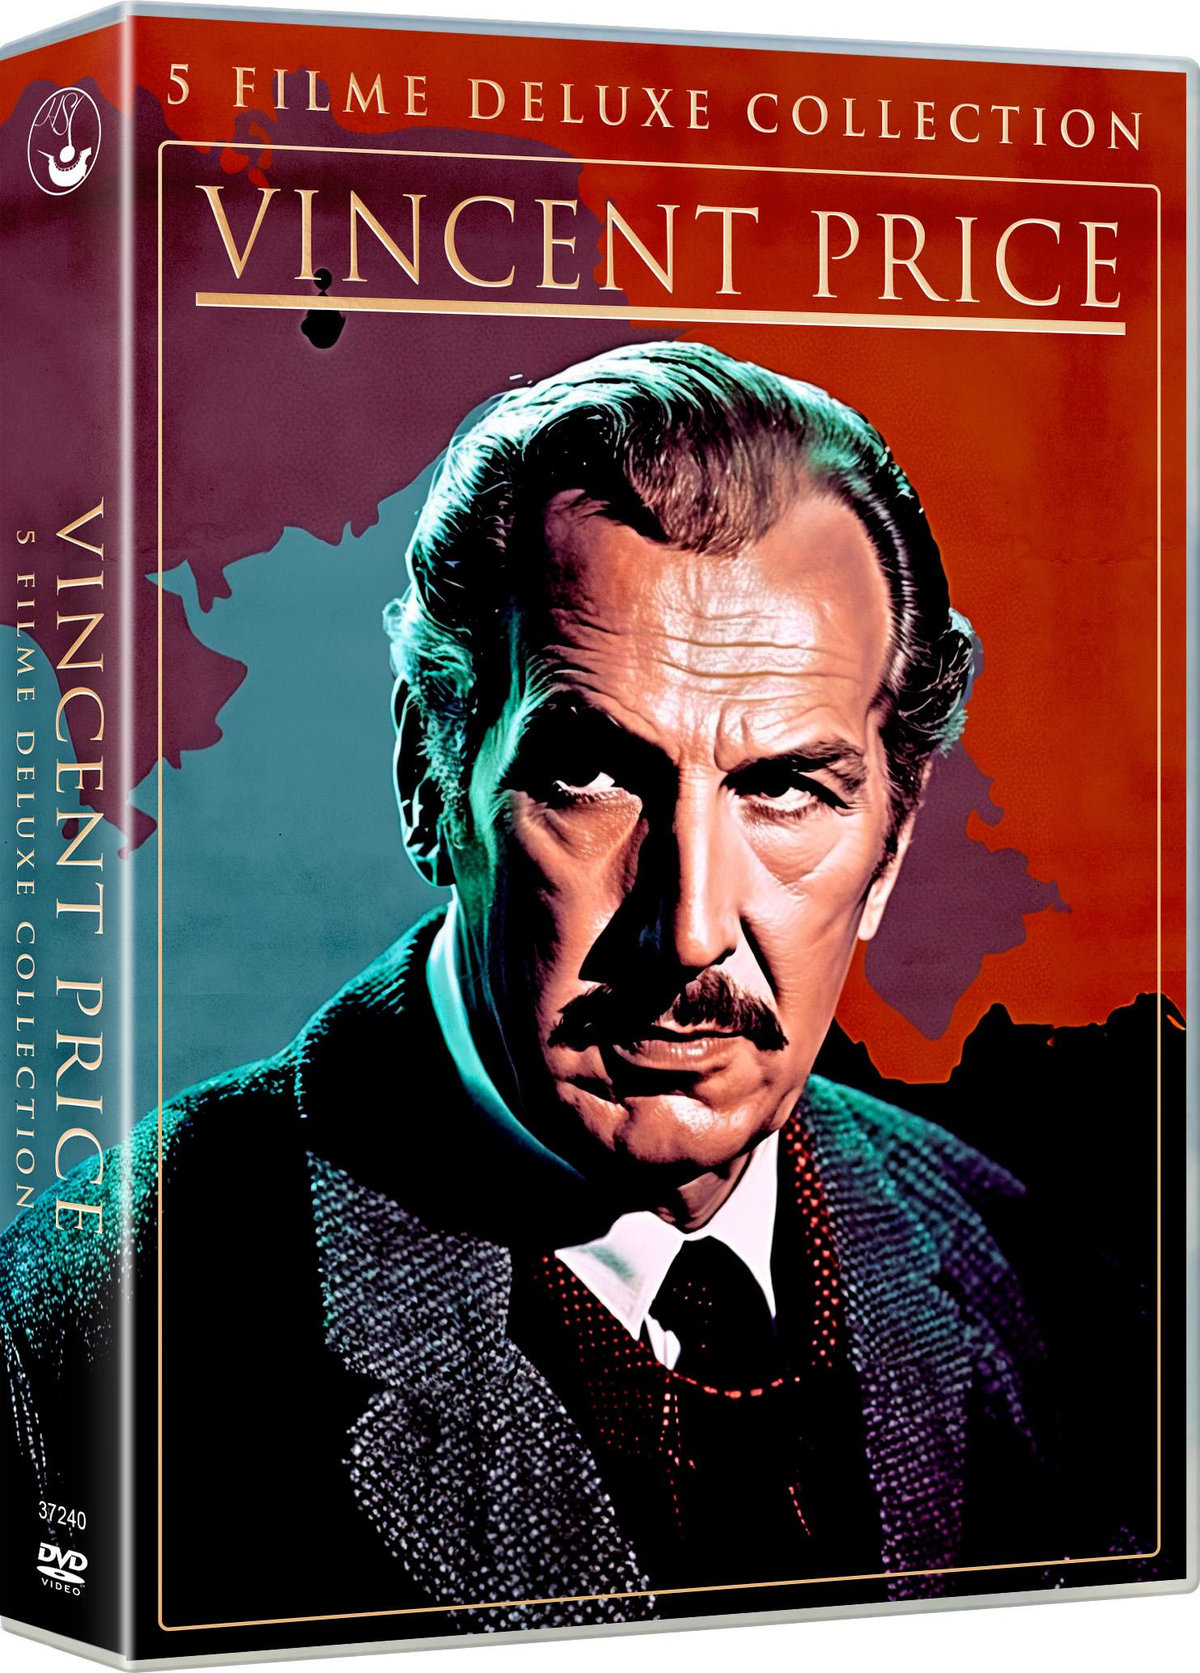 Vincent Price - Deluxe Collection